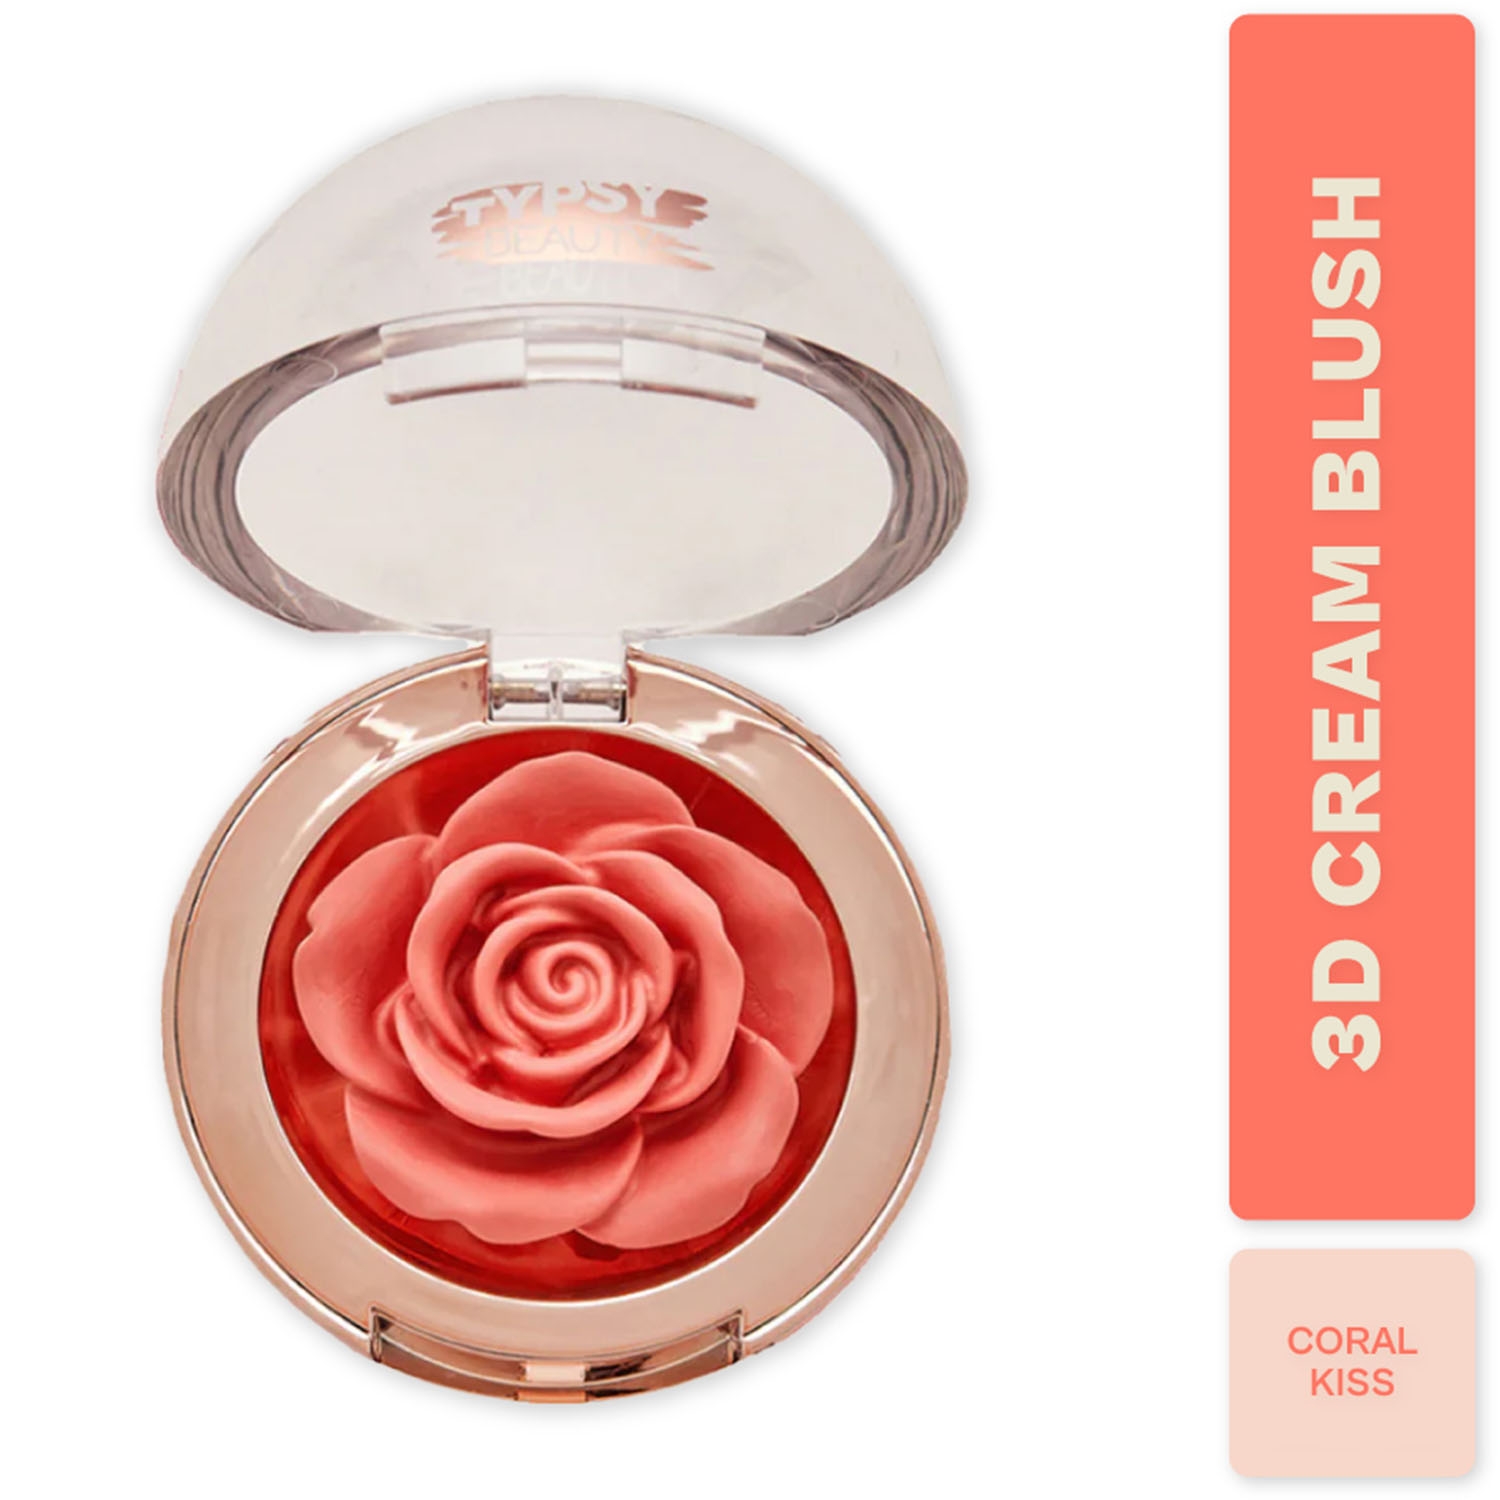 Typsy Beauty | Typsy Beauty Enchanted Garden 3D Rose Blush - Coral Kiss (4.8g)